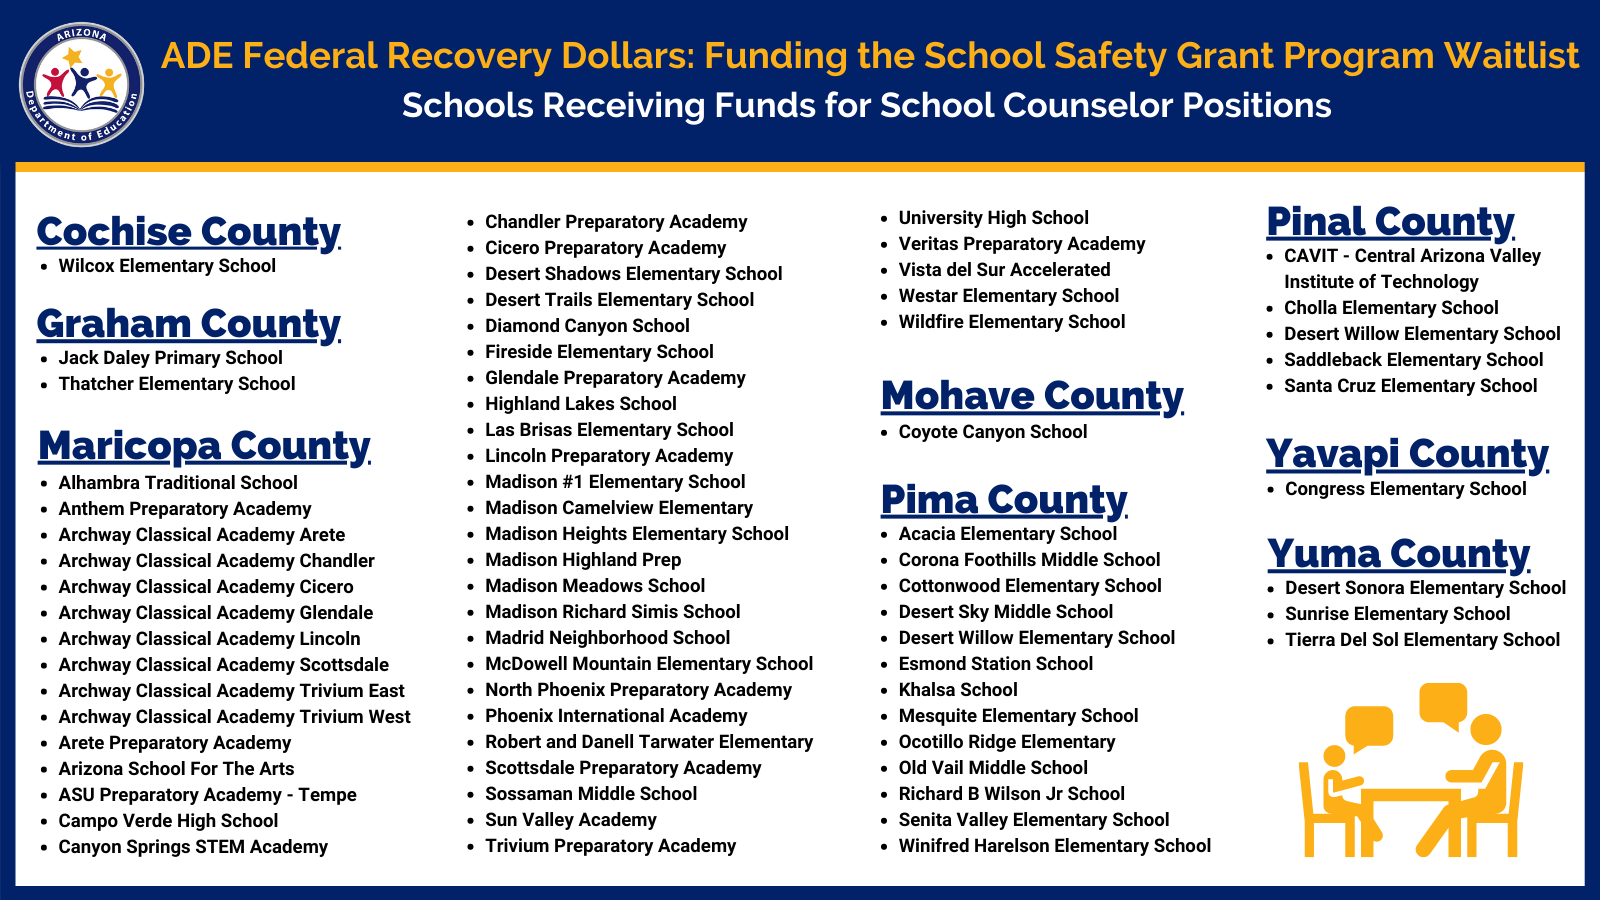 List of School Counselors funded by ESSER for the School Safety Program